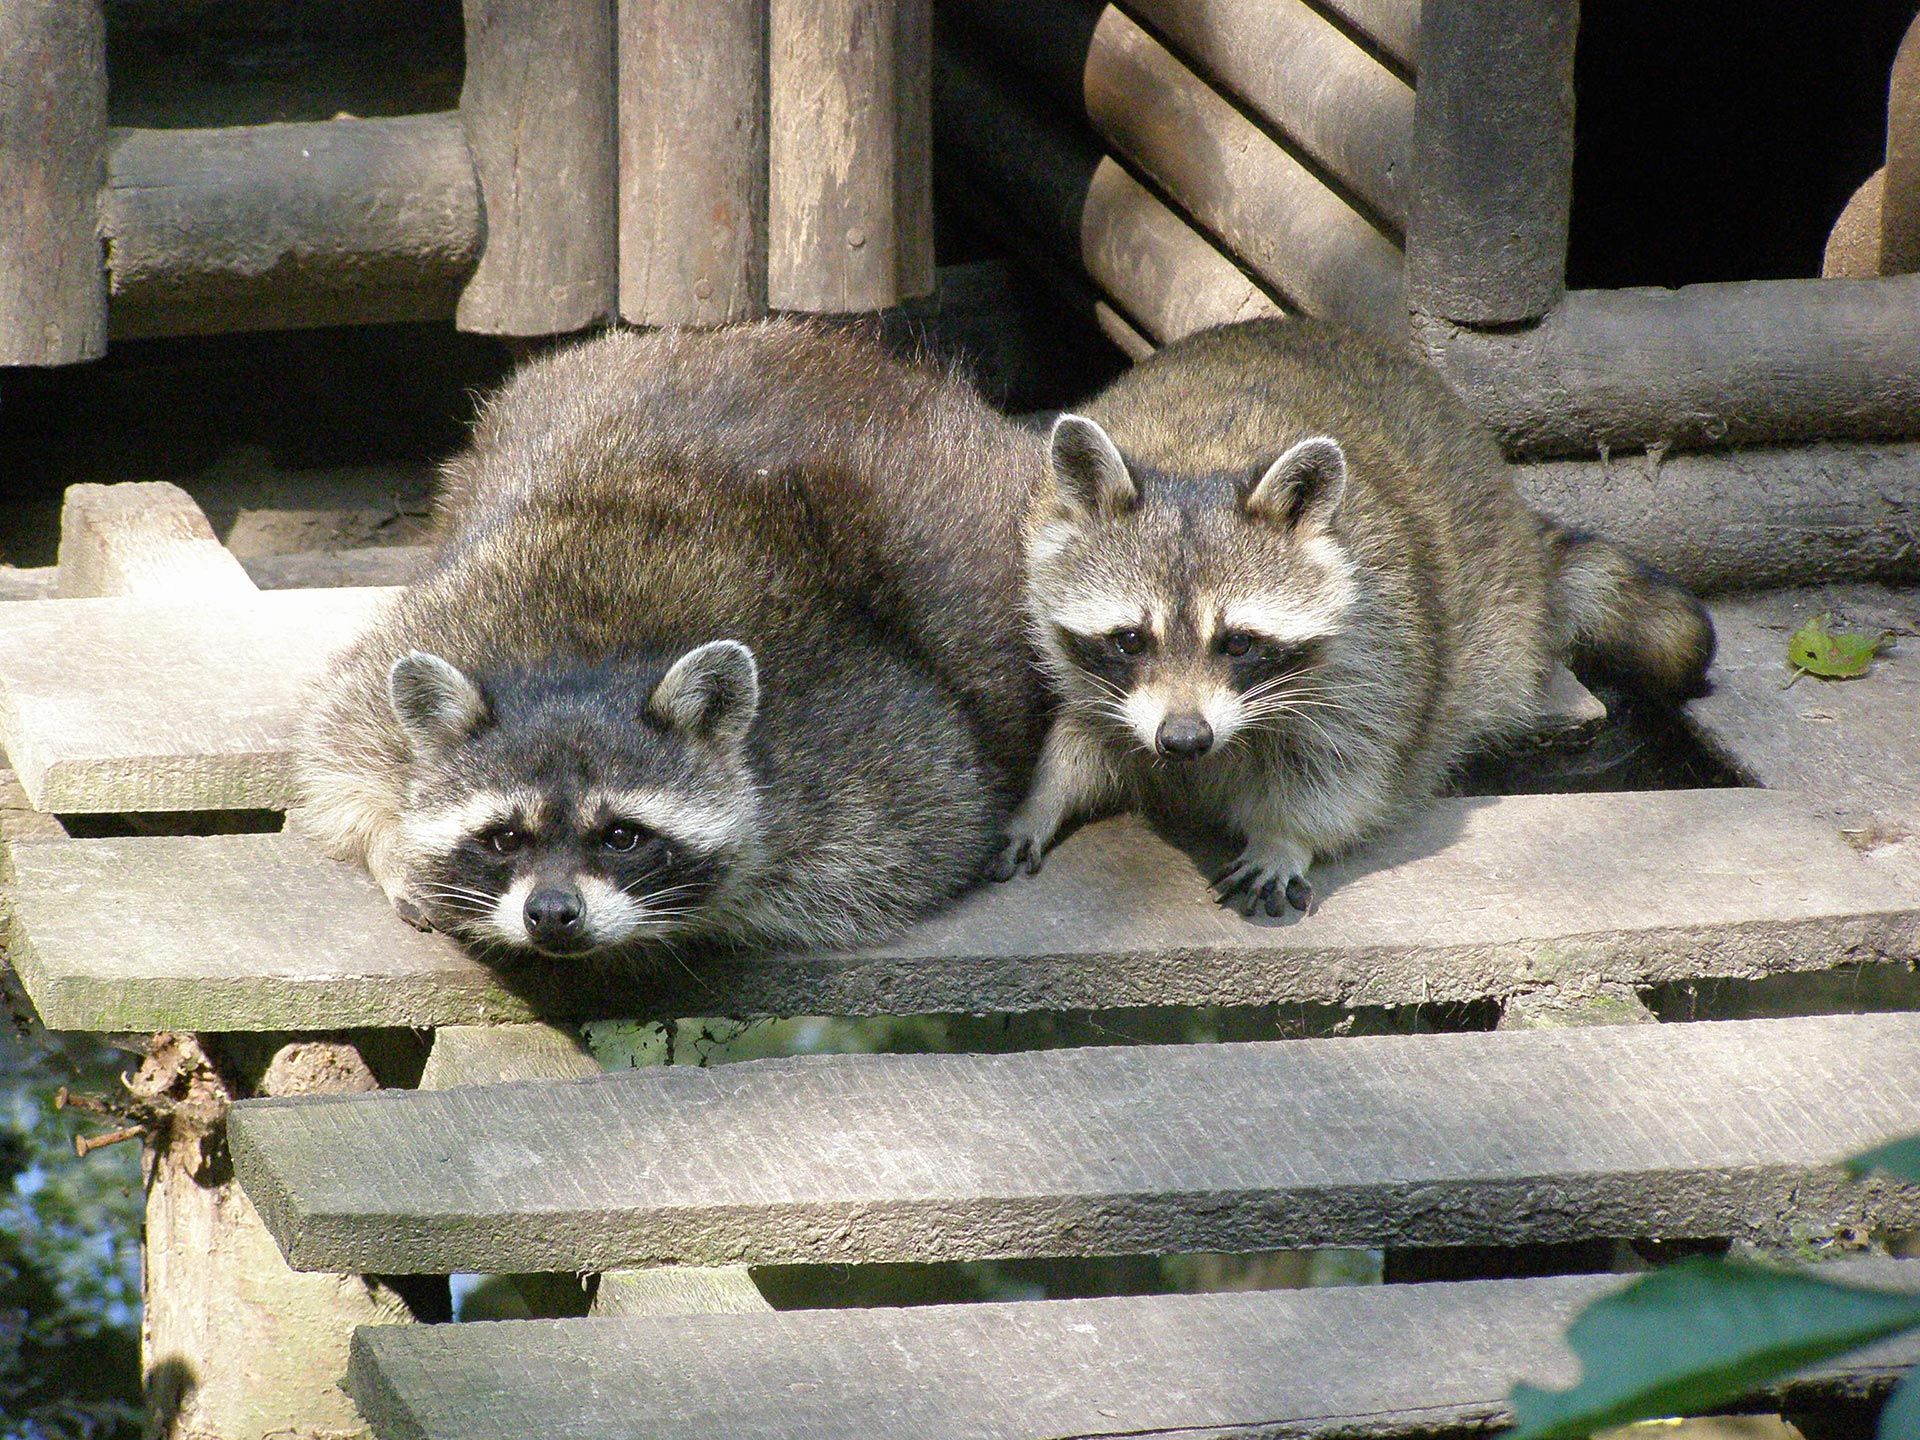 Pilgrim Pest Professionals is a raccoon control company and offers raccoon removal, raccoon control, and raccoon exclusion services.